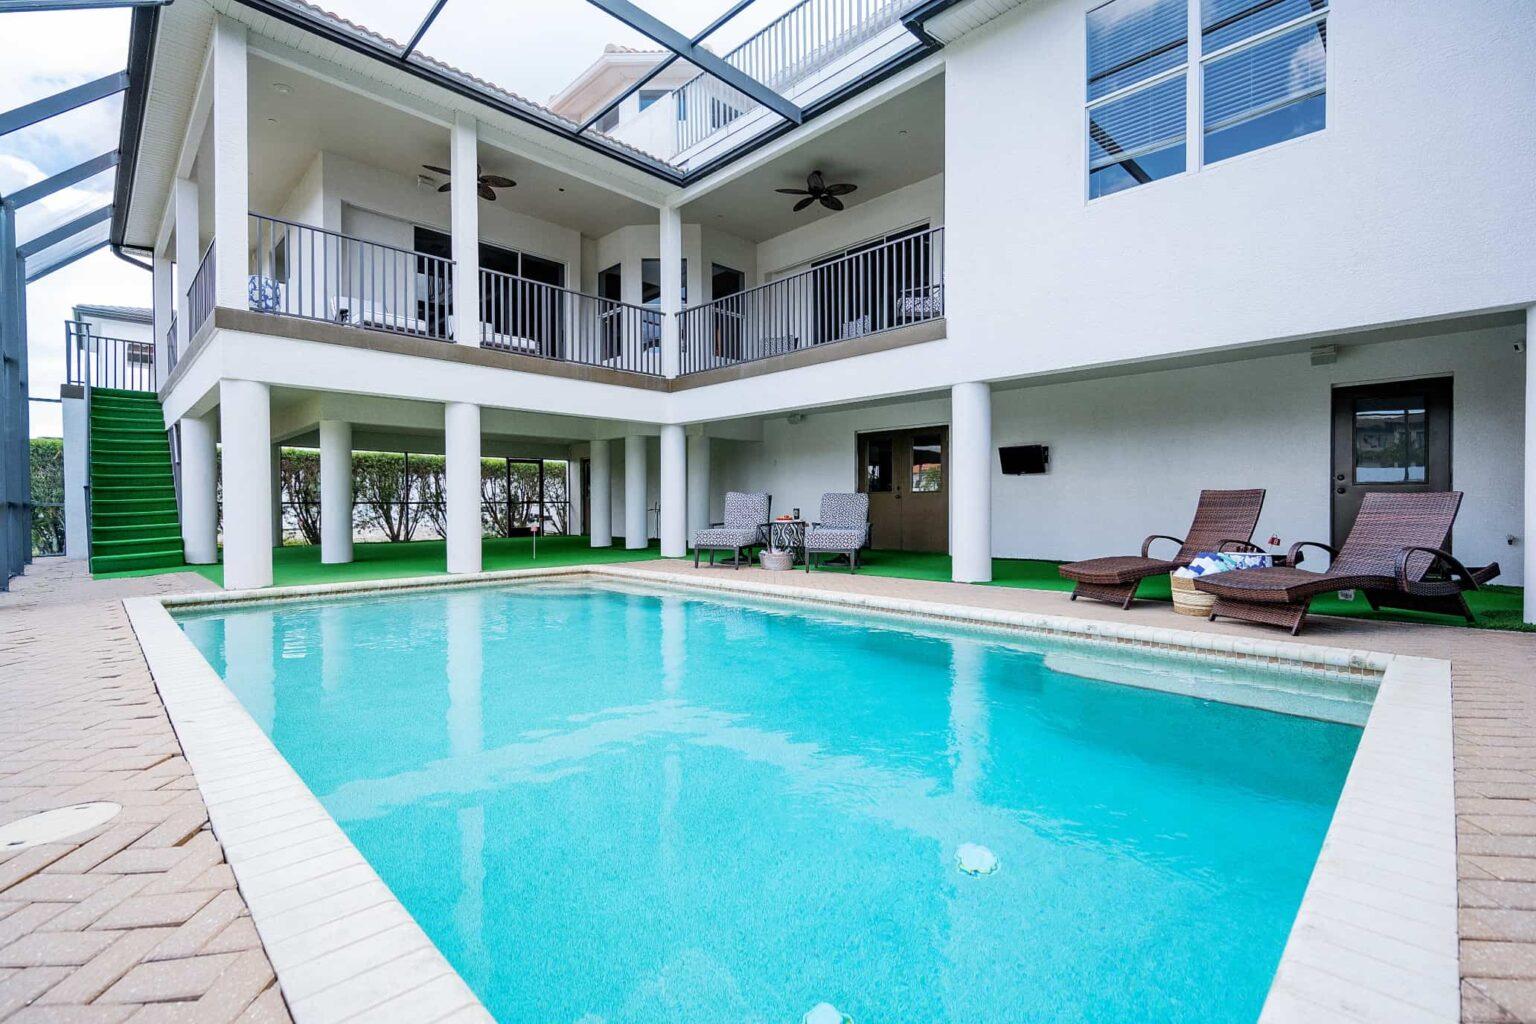 naples fl vacation home Pool with multi-level patios.